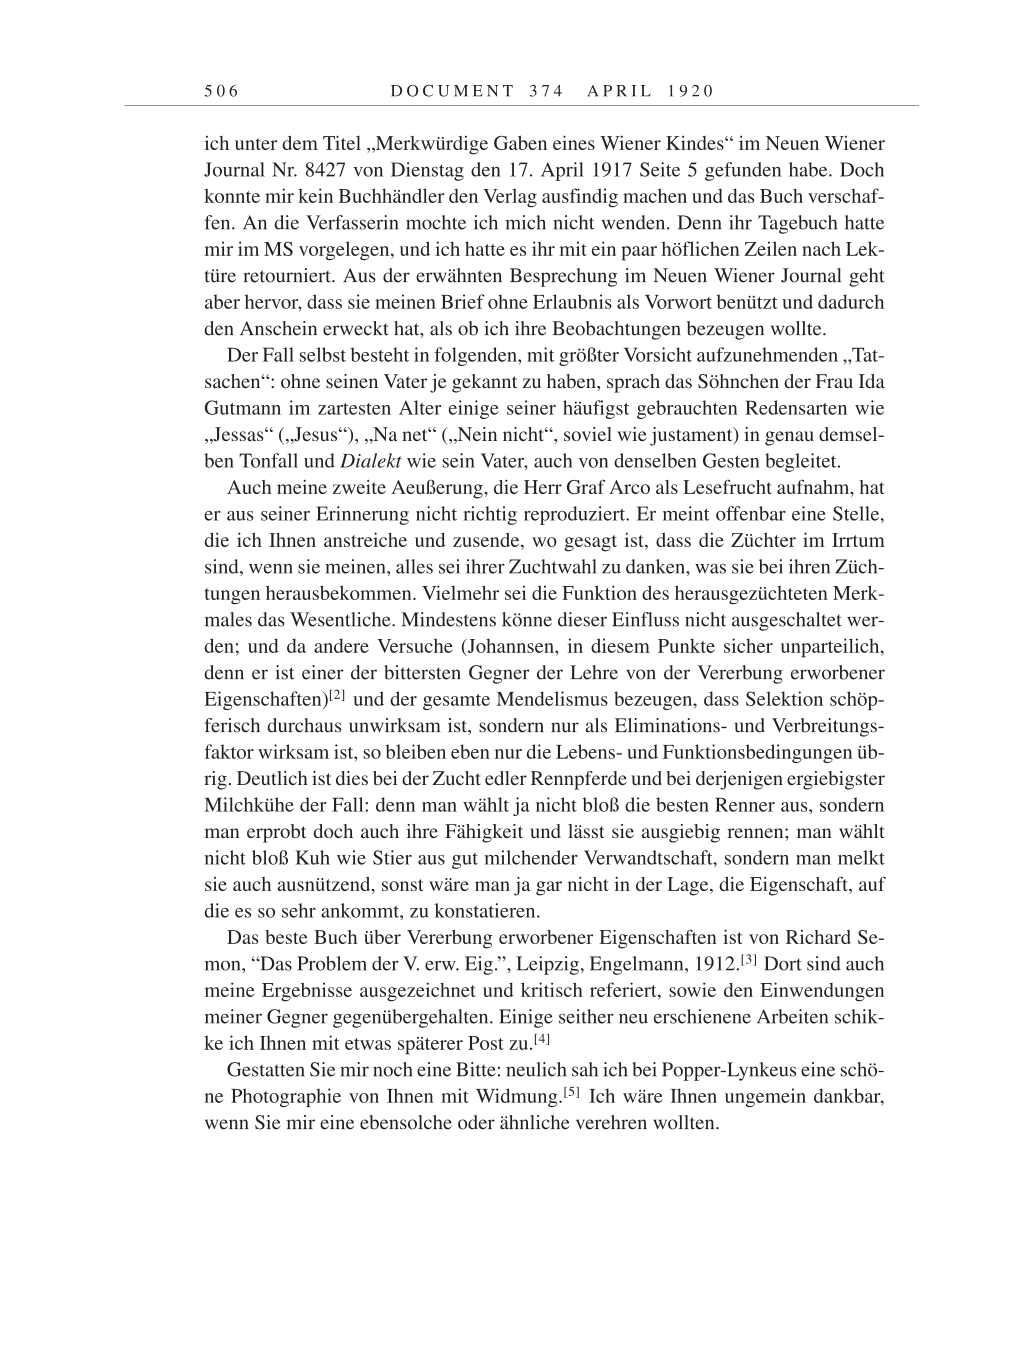 Volume 9: The Berlin Years: Correspondence January 1919-April 1920 page 506